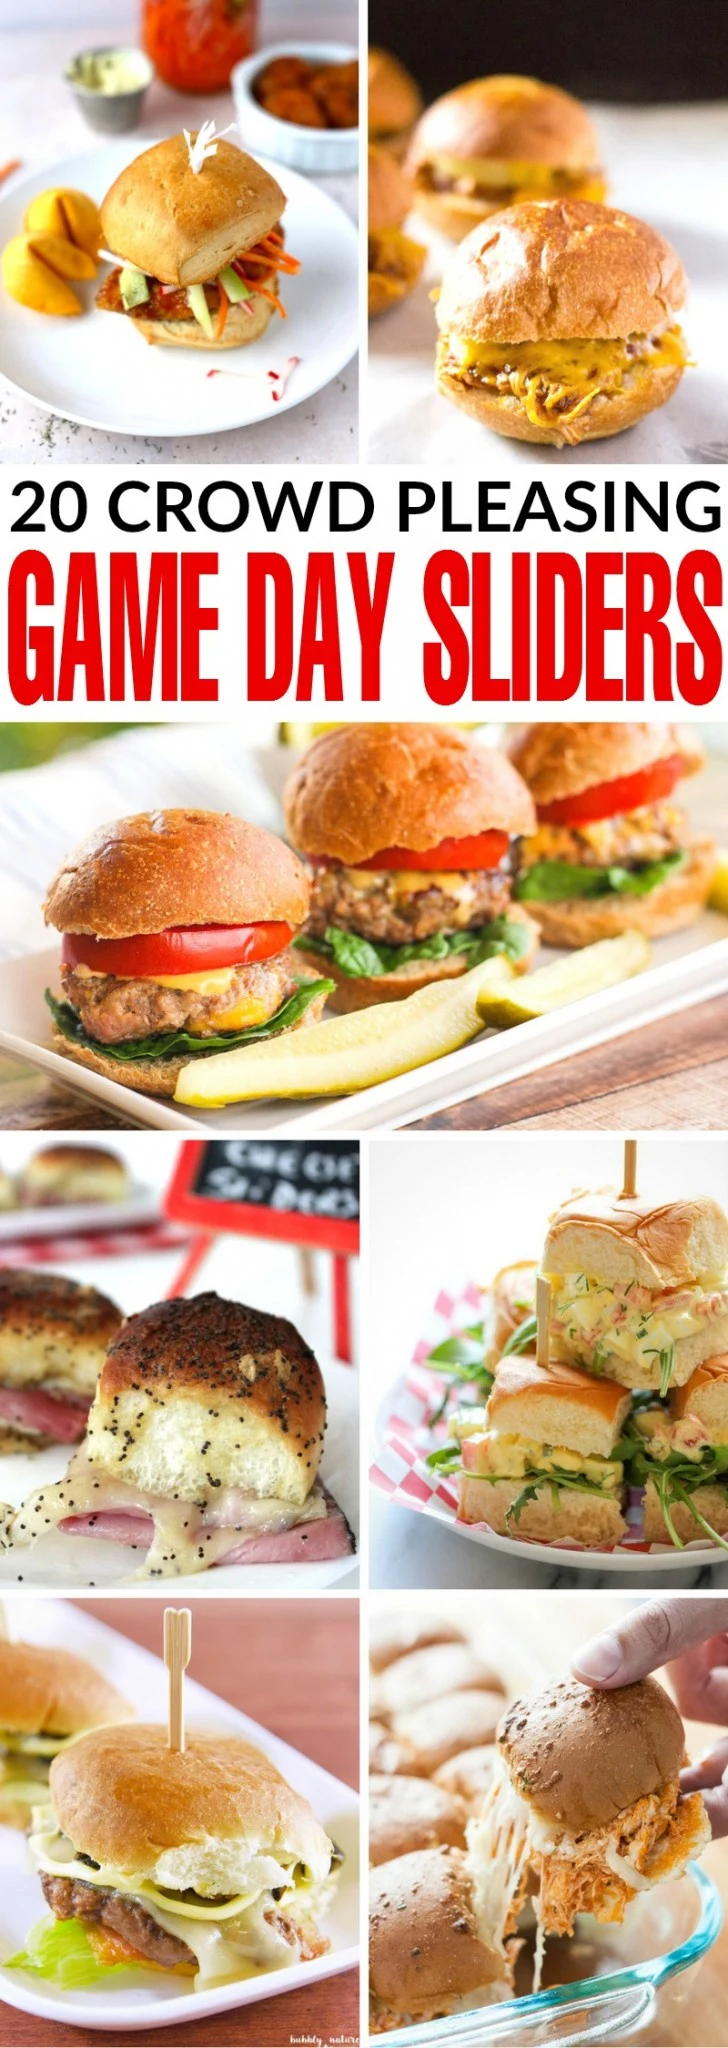 If you need a quick and easy appetizer for game day, sliders make the perfect choice. Your guests can enjoy these tasty game day sliders while keeping their eyes on the screen.